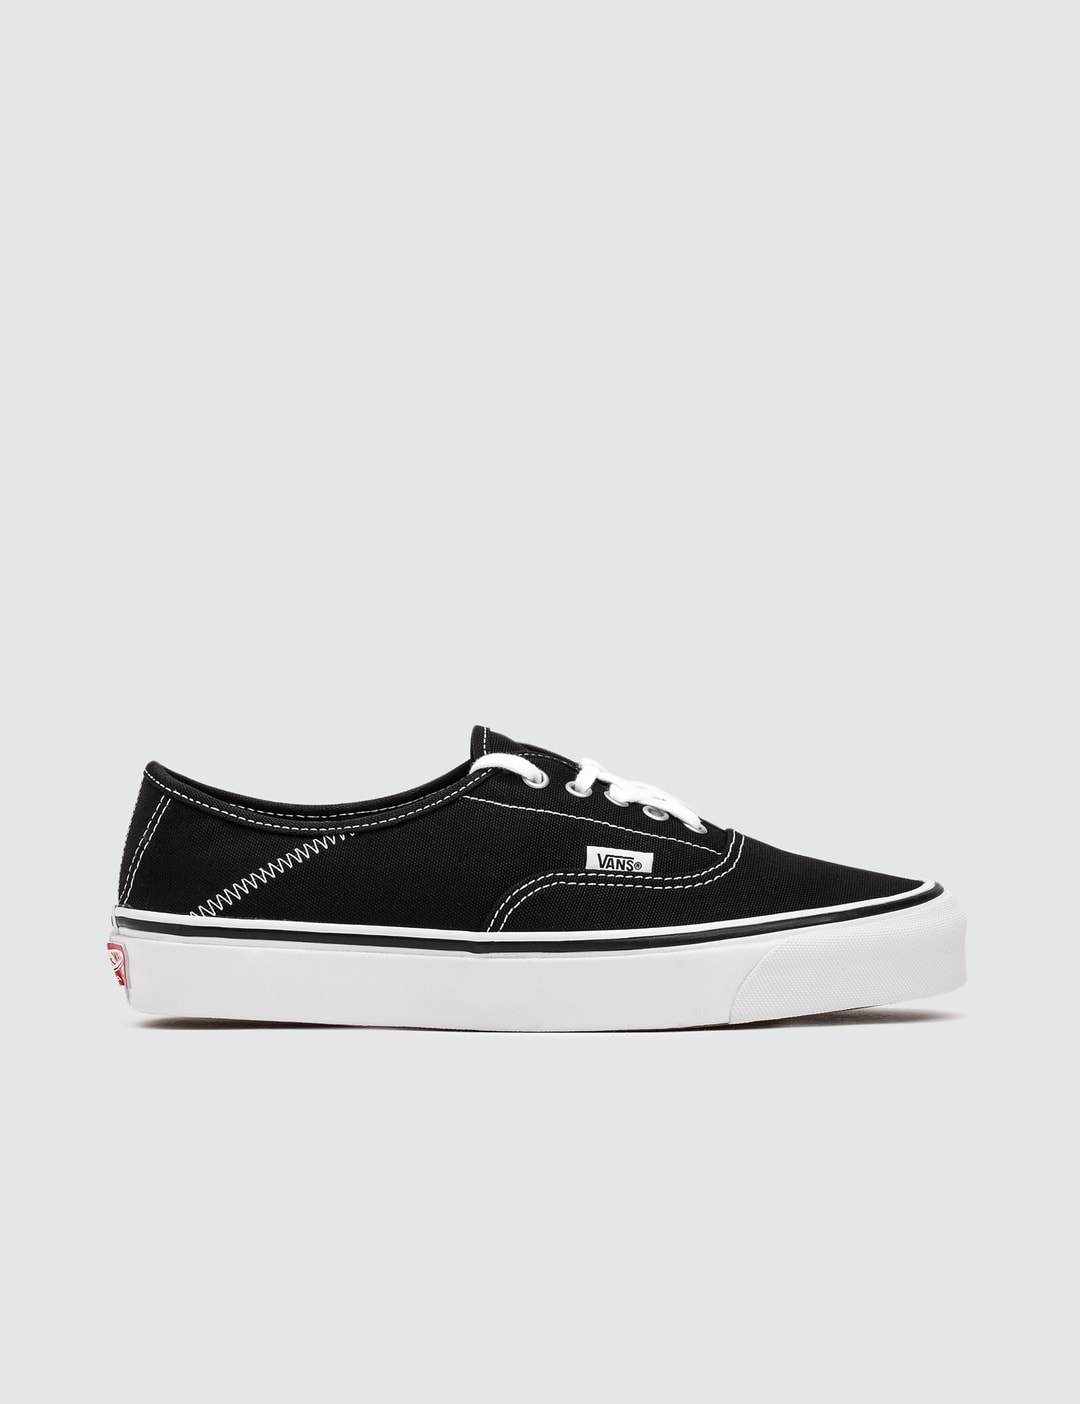 1017 ALYX 9SM - Alyx x Vans OG Style 43 Authentic Fold Down | HBX -  Globally Curated Fashion and Lifestyle by Hypebeast